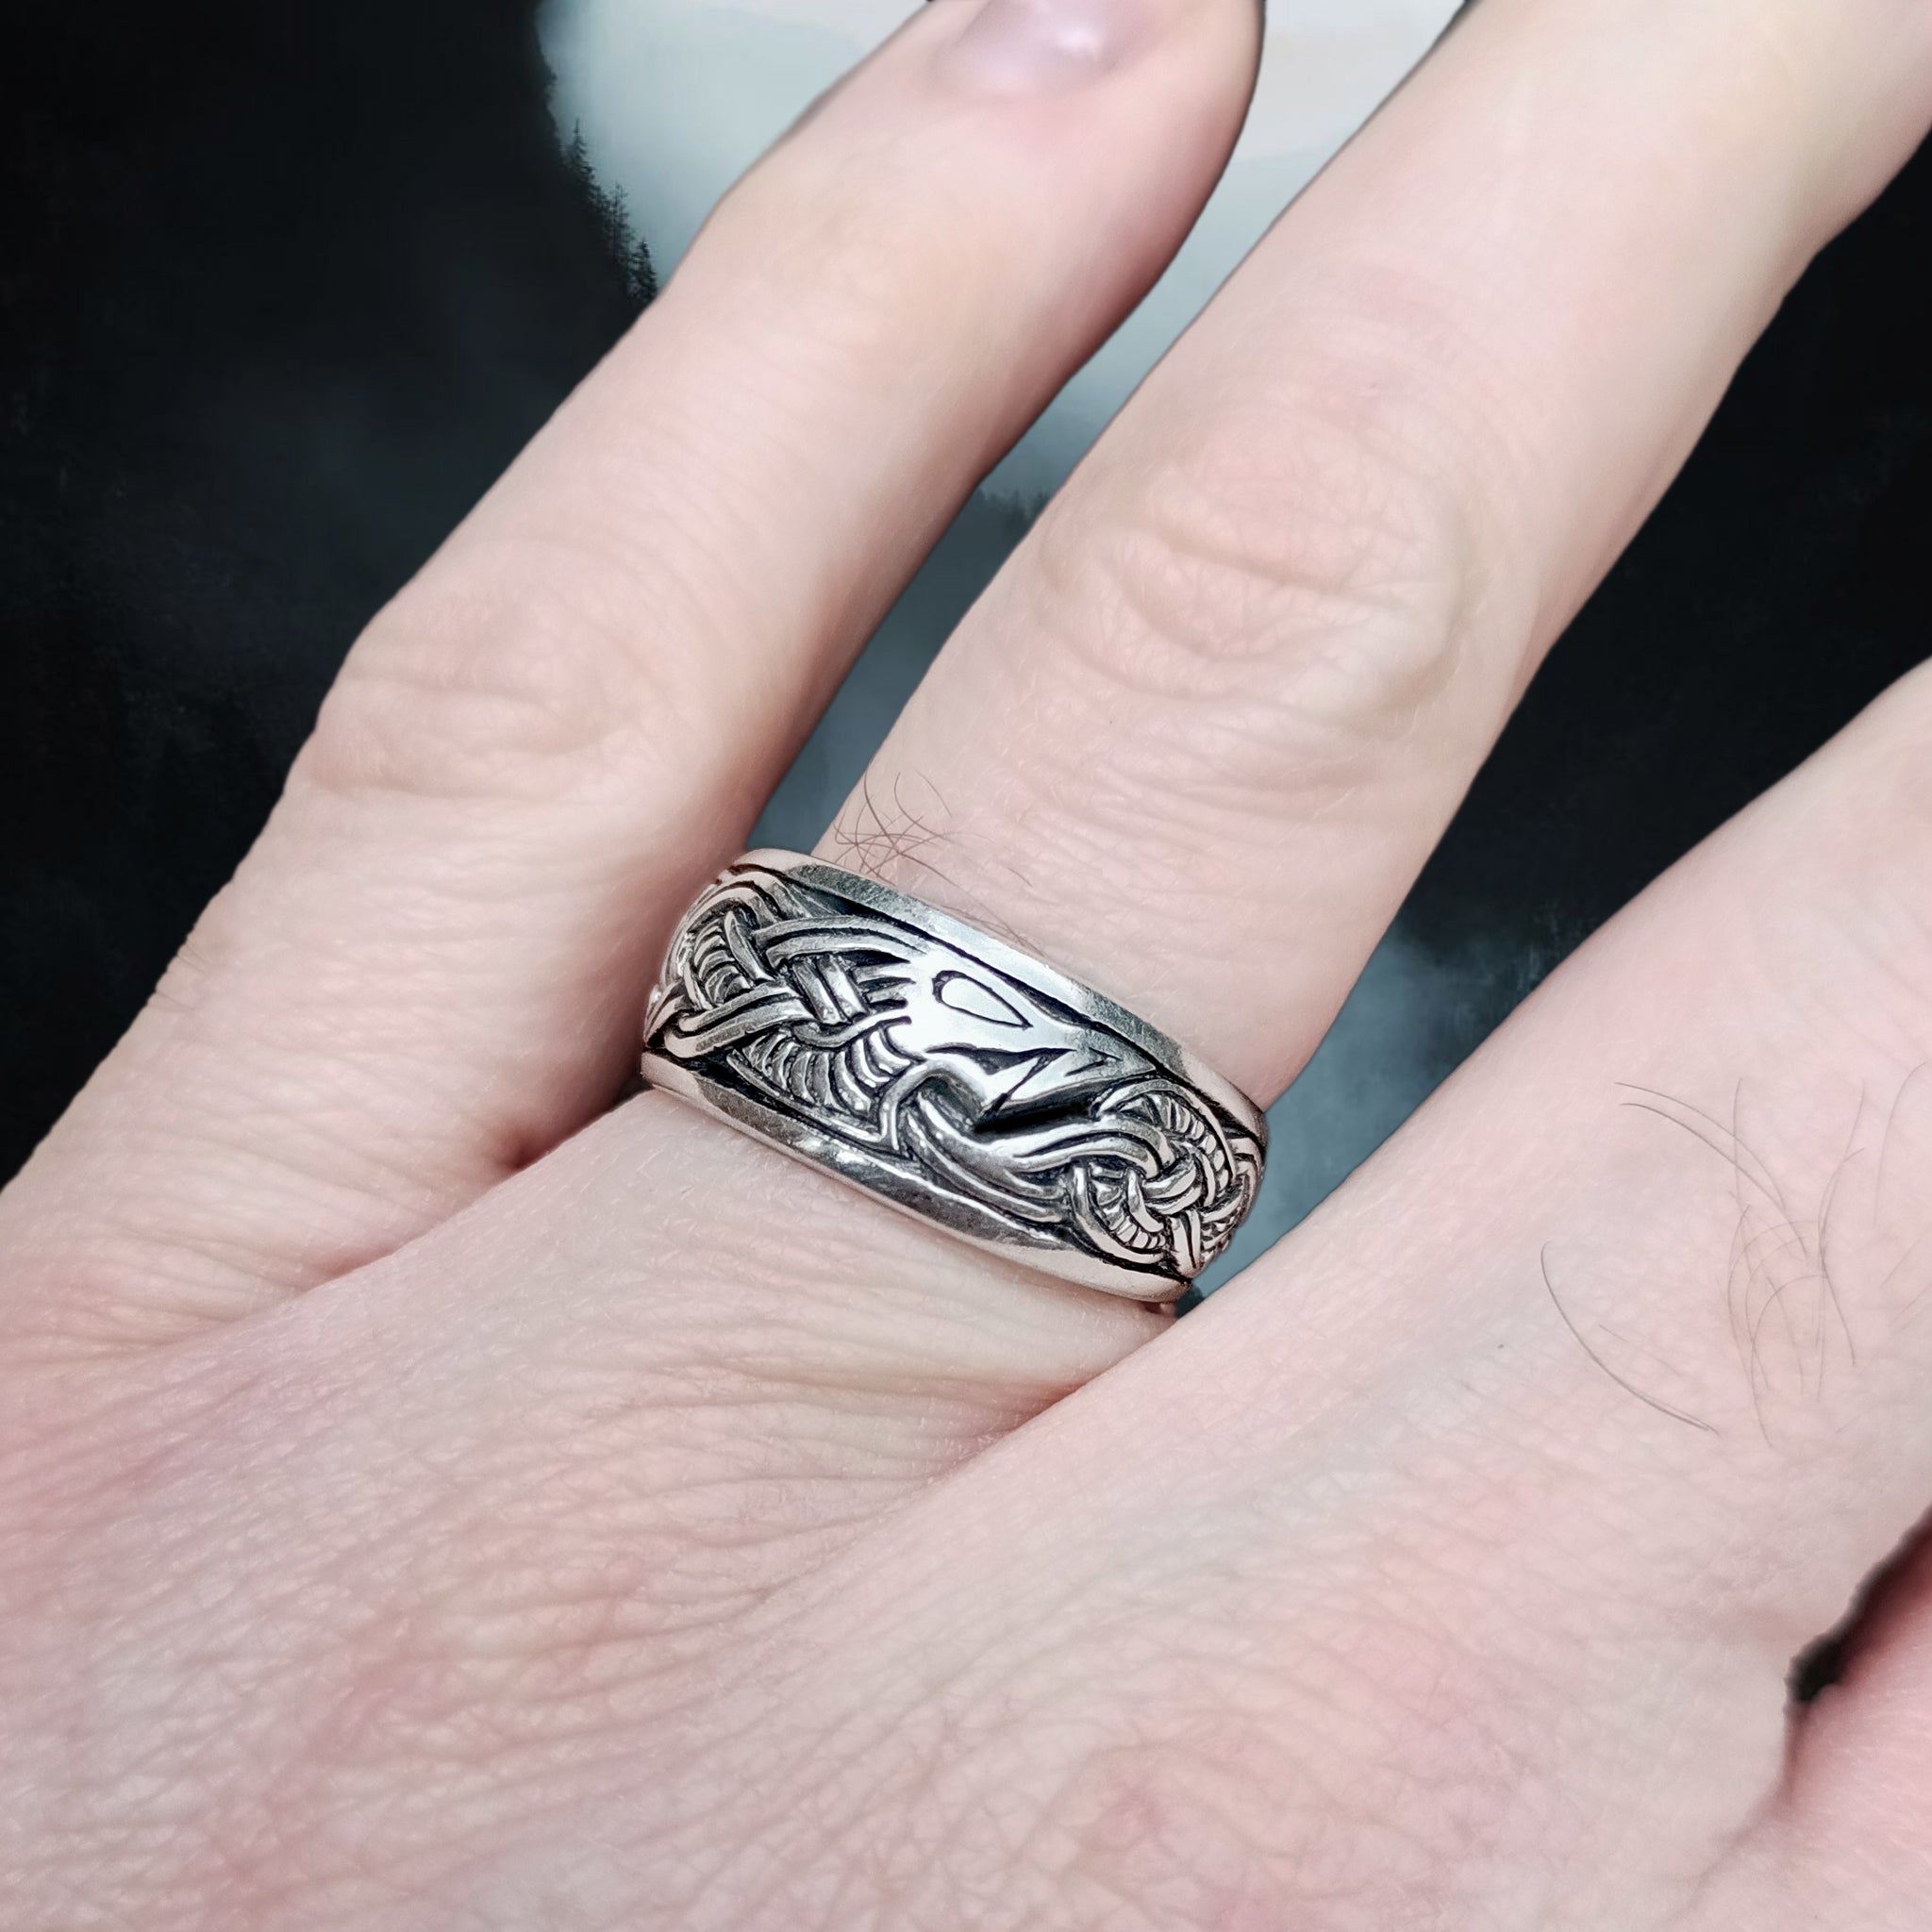 ad silver dragon ring on